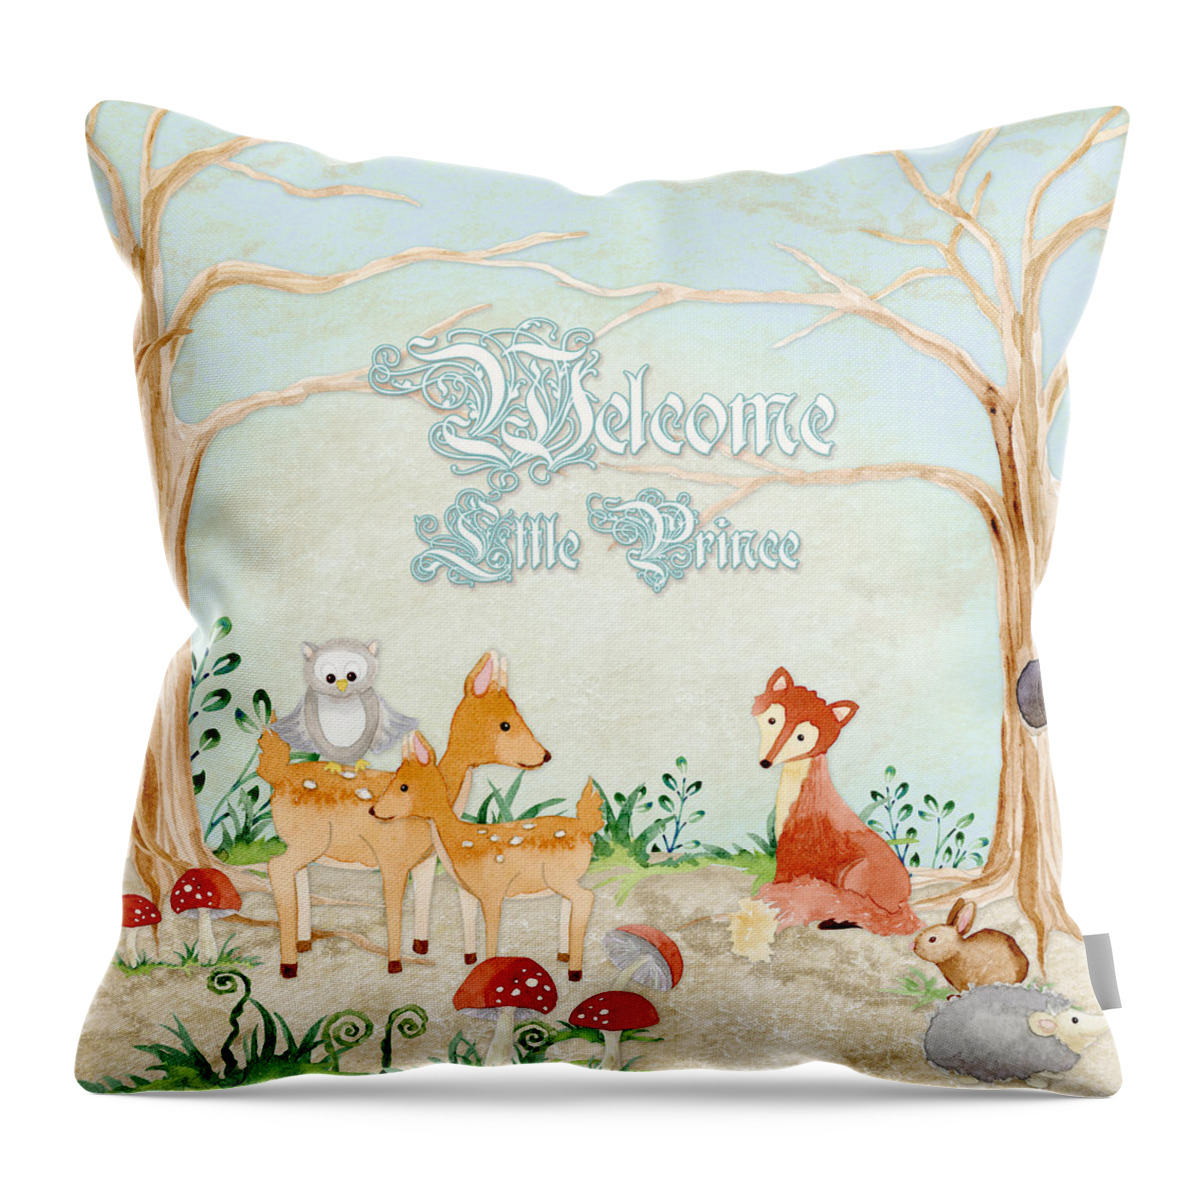 Woodchuck Throw Pillow featuring the painting Woodland Fairy Tale - Welcome Little Prince by Audrey Jeanne Roberts